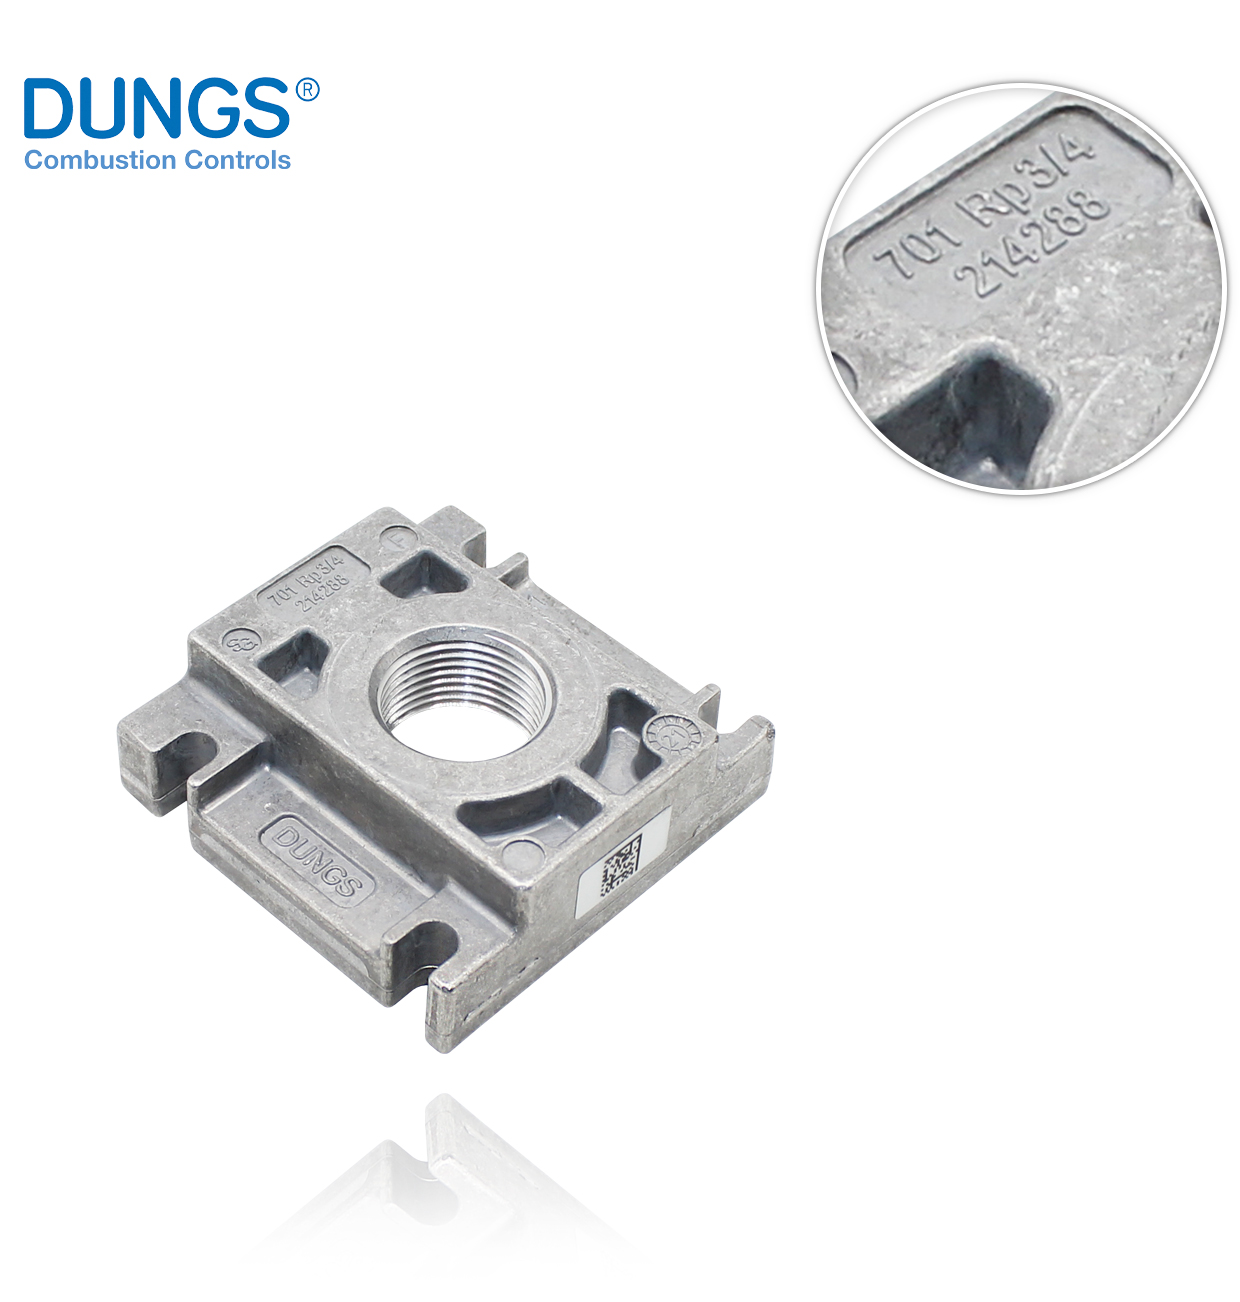 R3/4" DUNGS FLANGE with PLUG FOR DMV 507/11